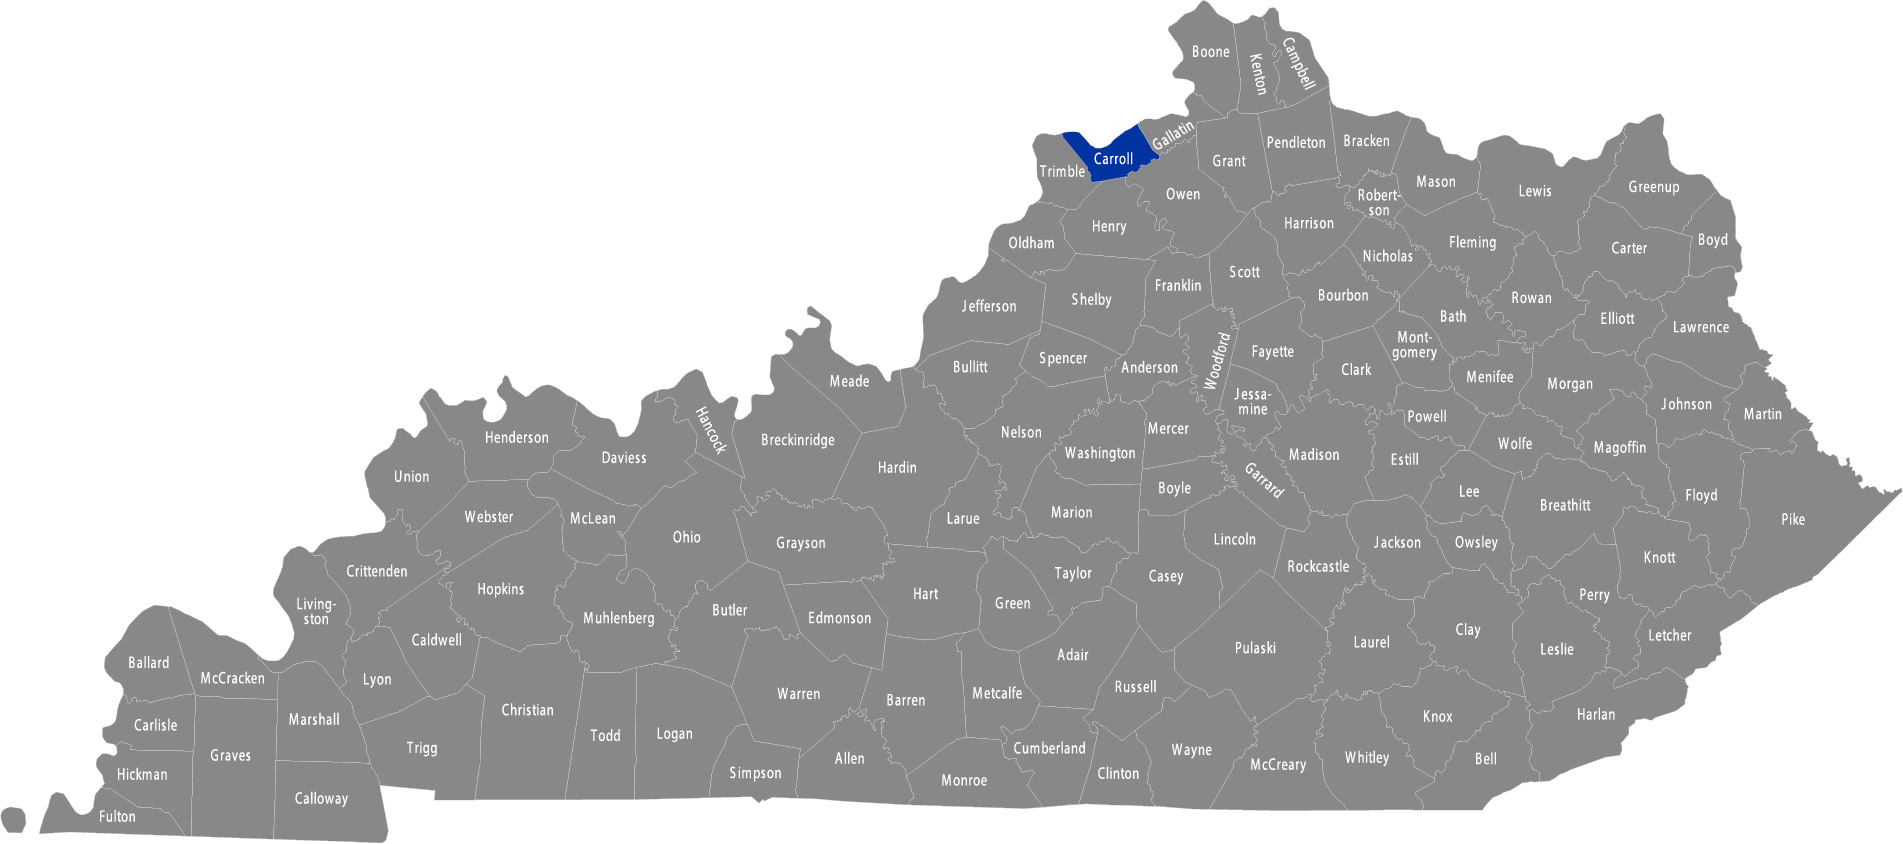 State of Kentucky map with Carroll County highlighted